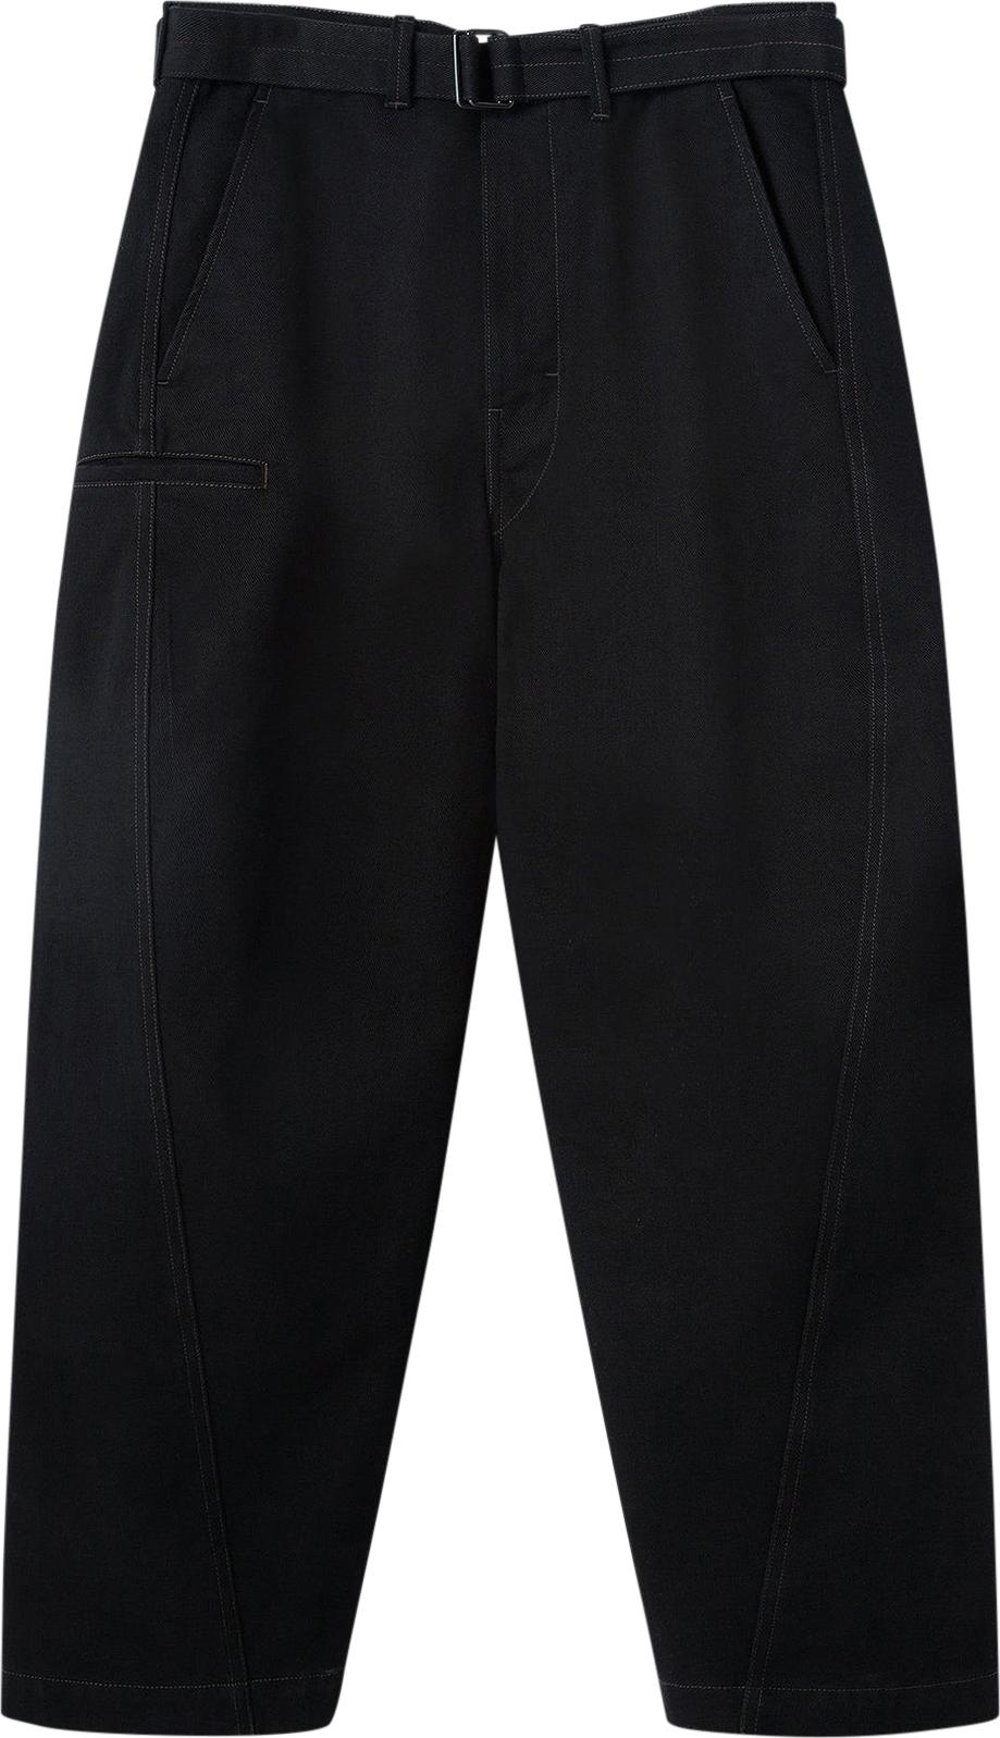 Buy Lemaire Twisted Pants 'Black' - M 213 PA137 LD069 999 | GOAT